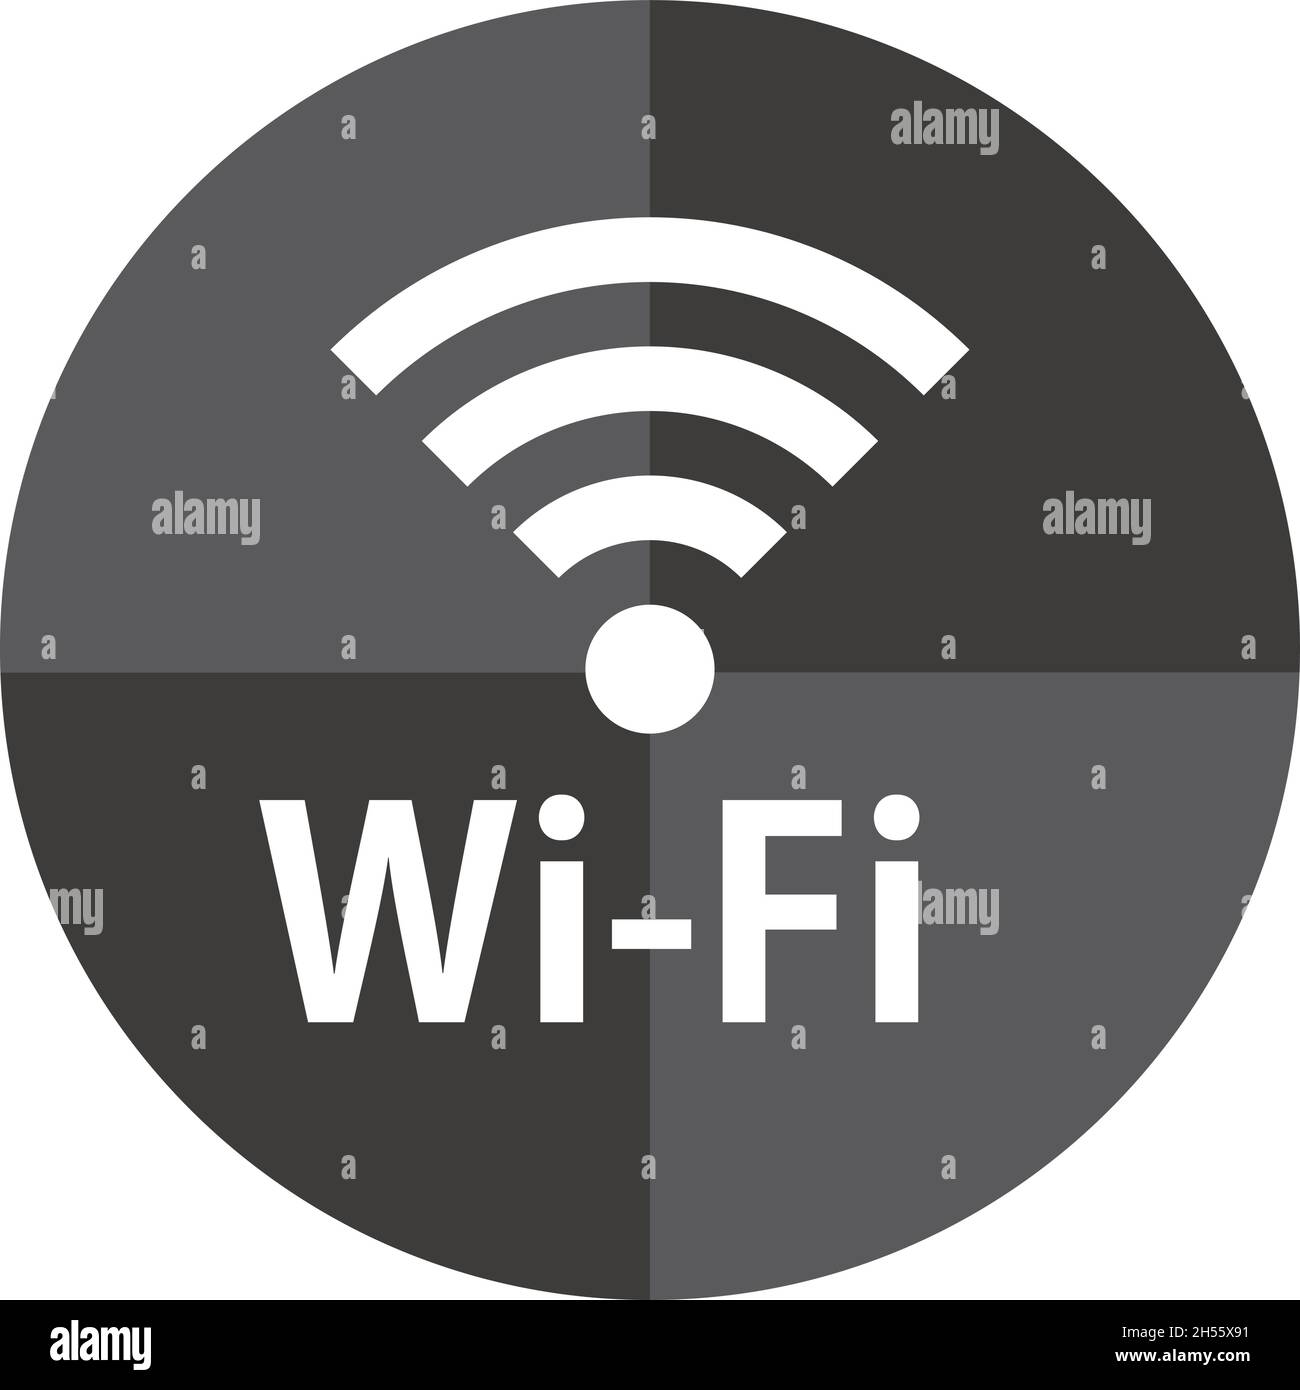 Wi-Fi icon in black and gray design is a useful vector illustration that gives a cool impression. Stock Vector